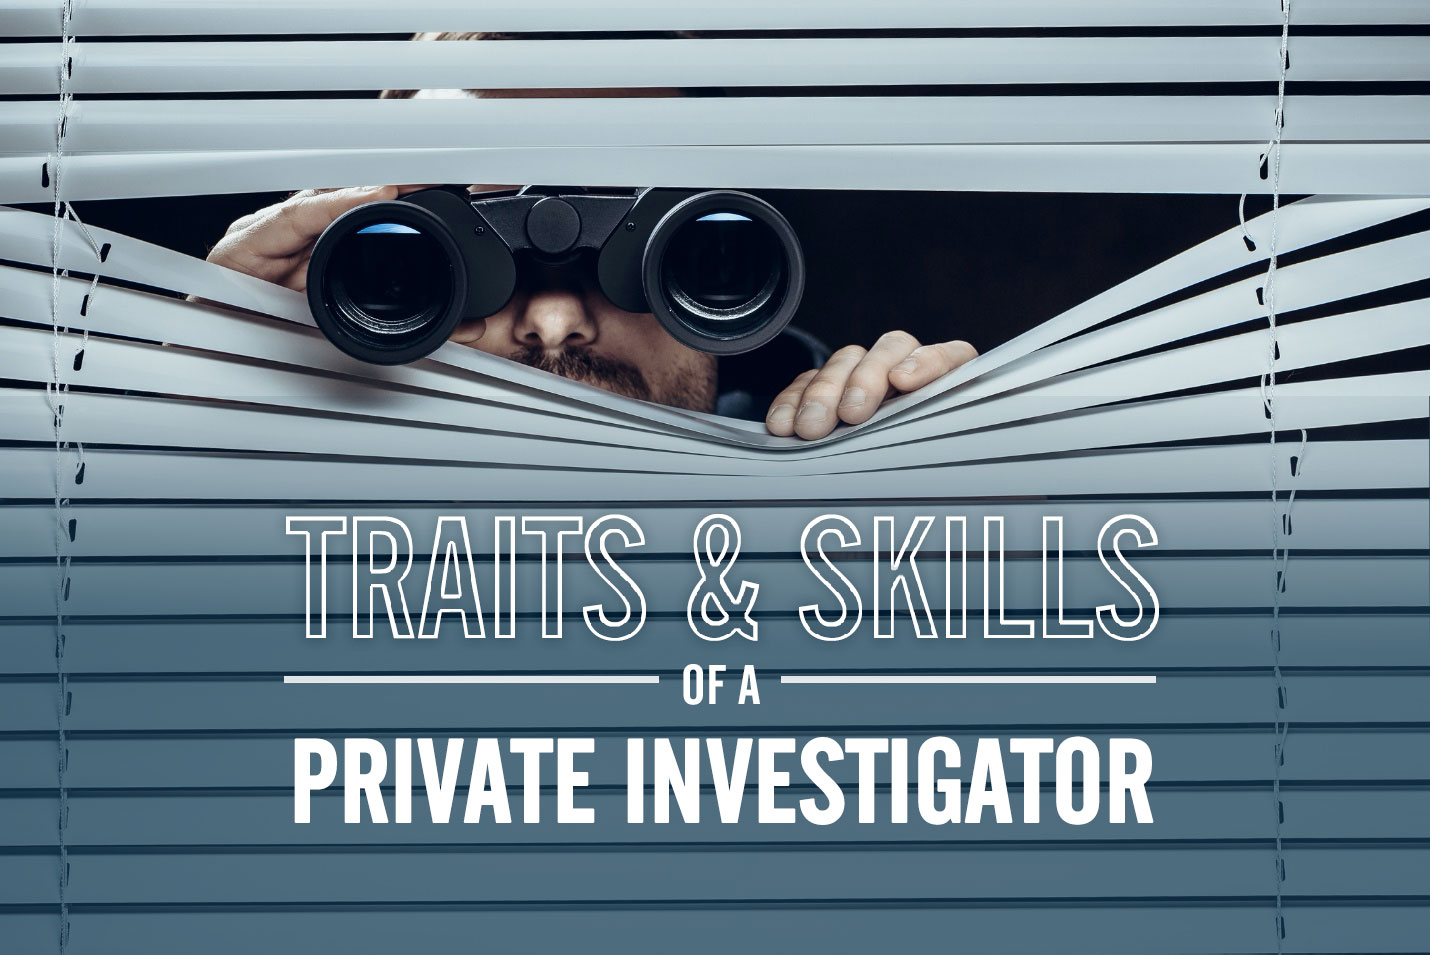 7 Essential Traits and Skills of a Private Investigator